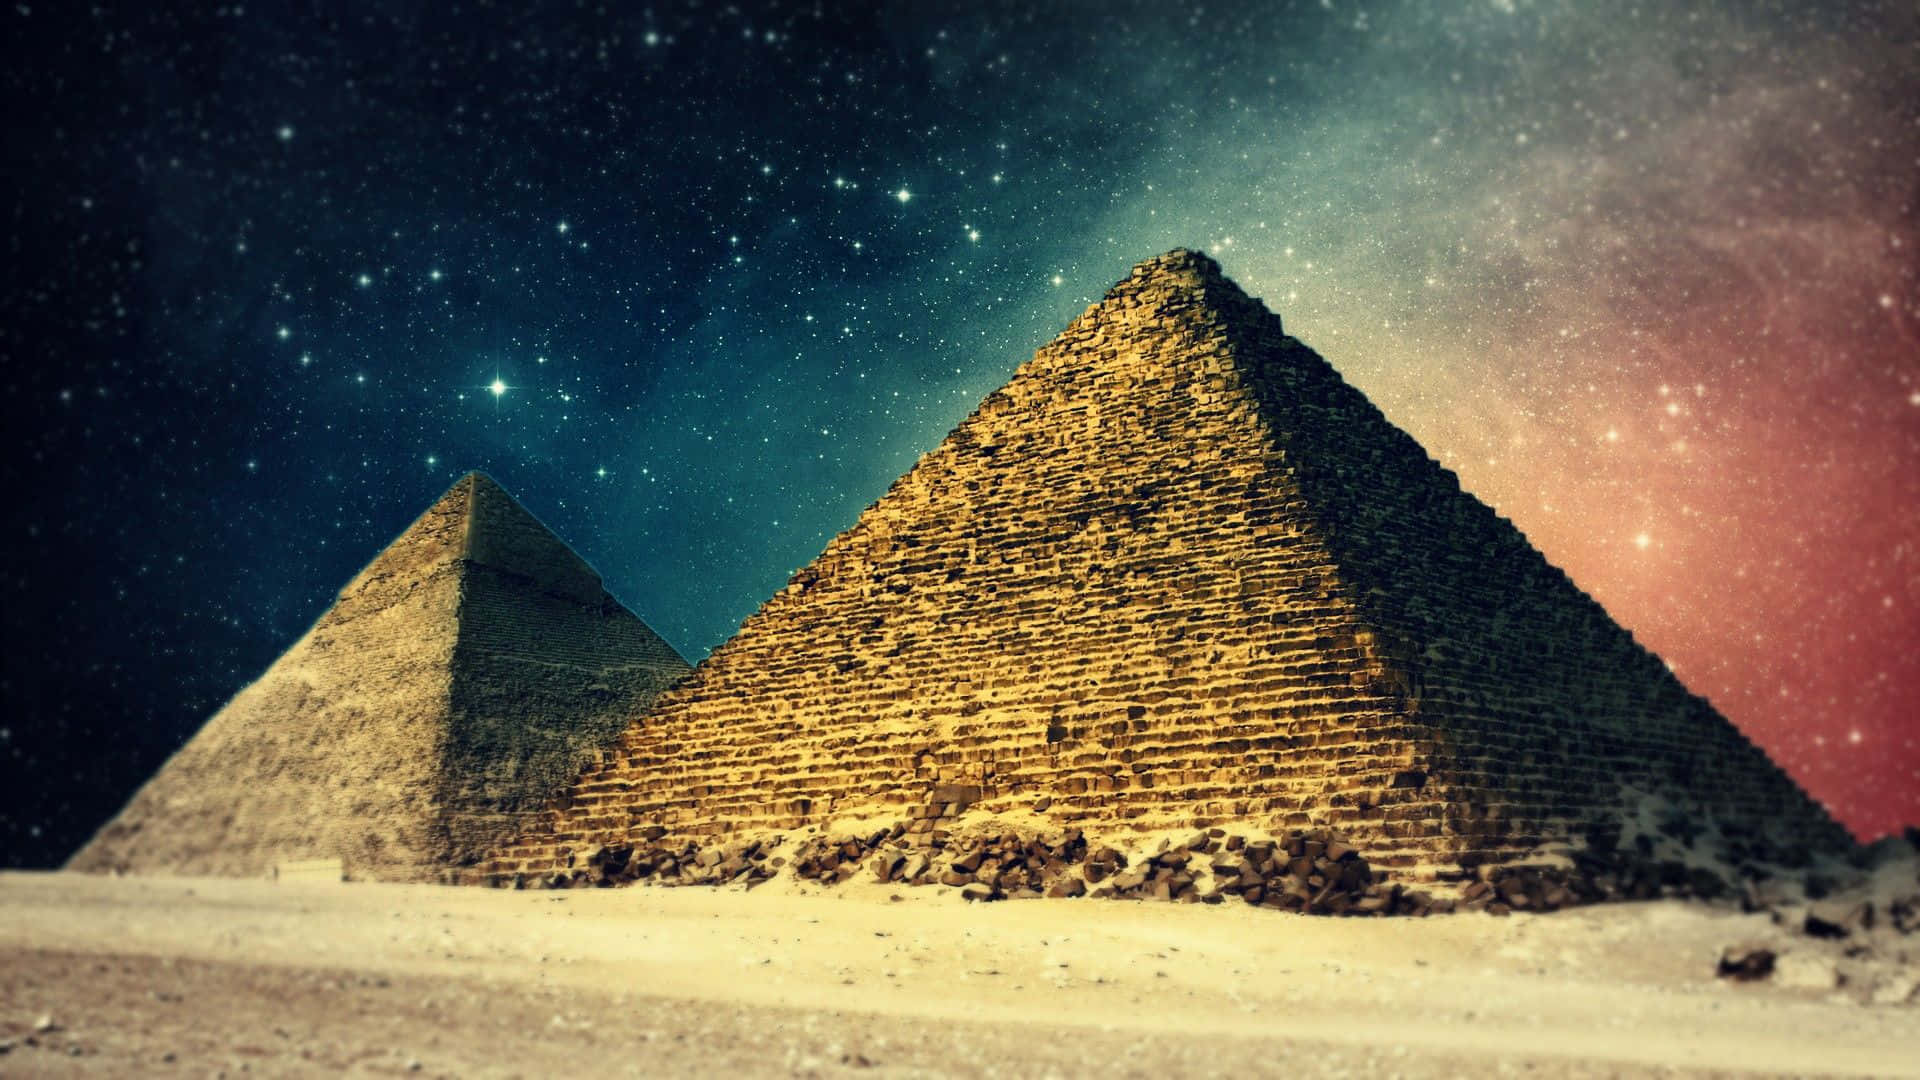 Three Pyramids In The Desert With Stars In The Sky